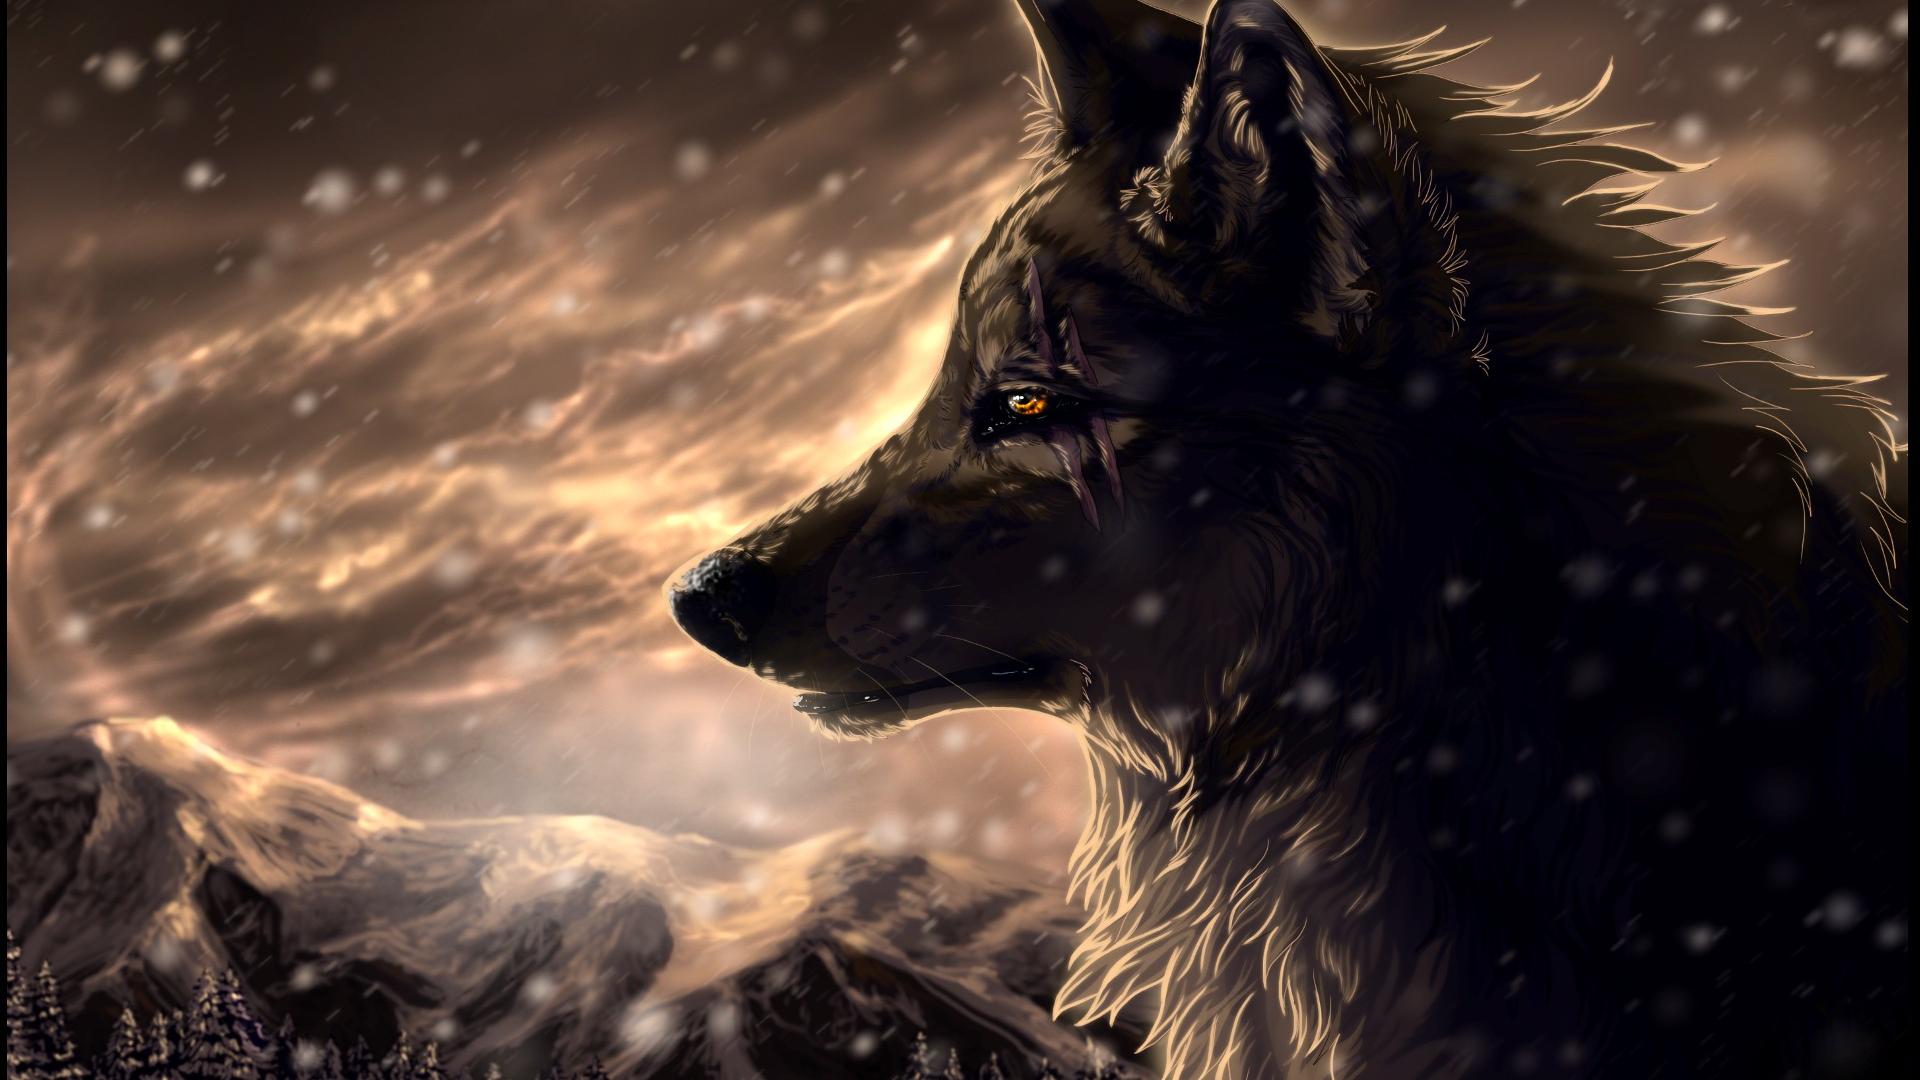 Wolves Full HD Widescreen wallpapers for desktop download